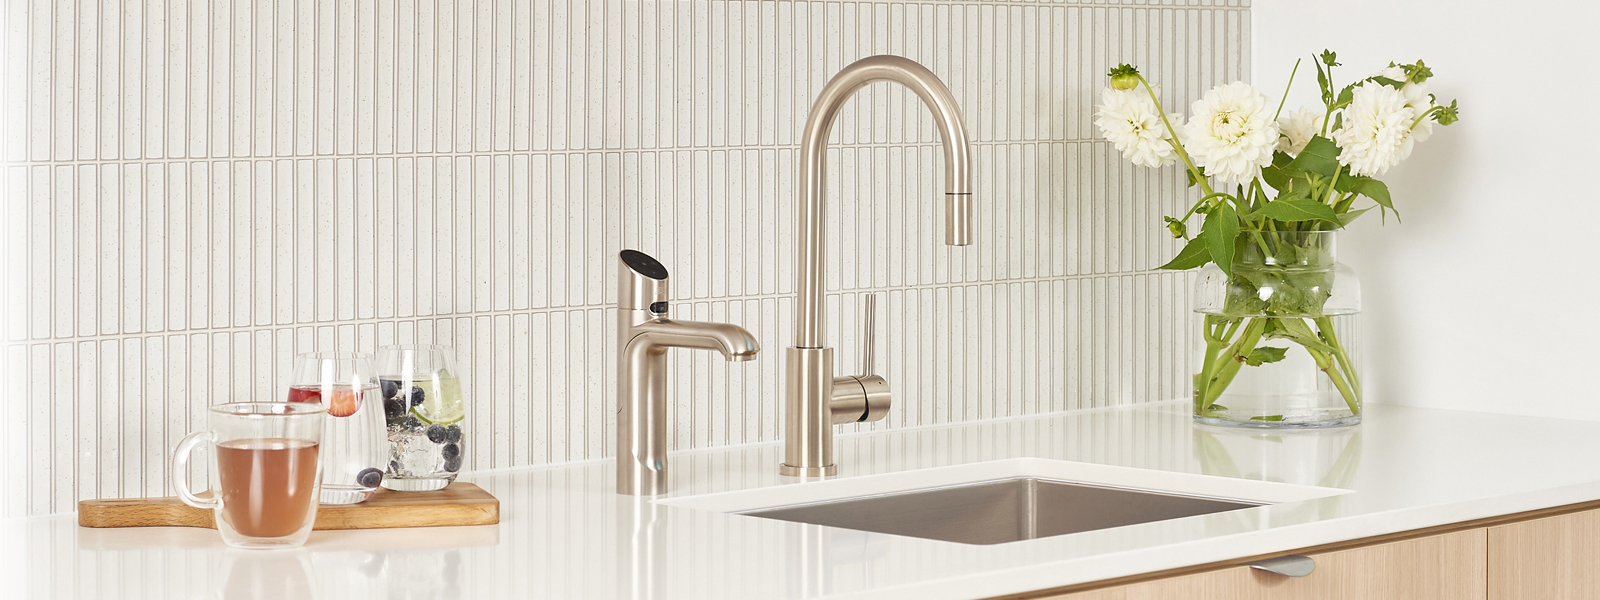 Purchase any ZIP Residential HydroTap and receive up to $300 Cashback at Hart & Co